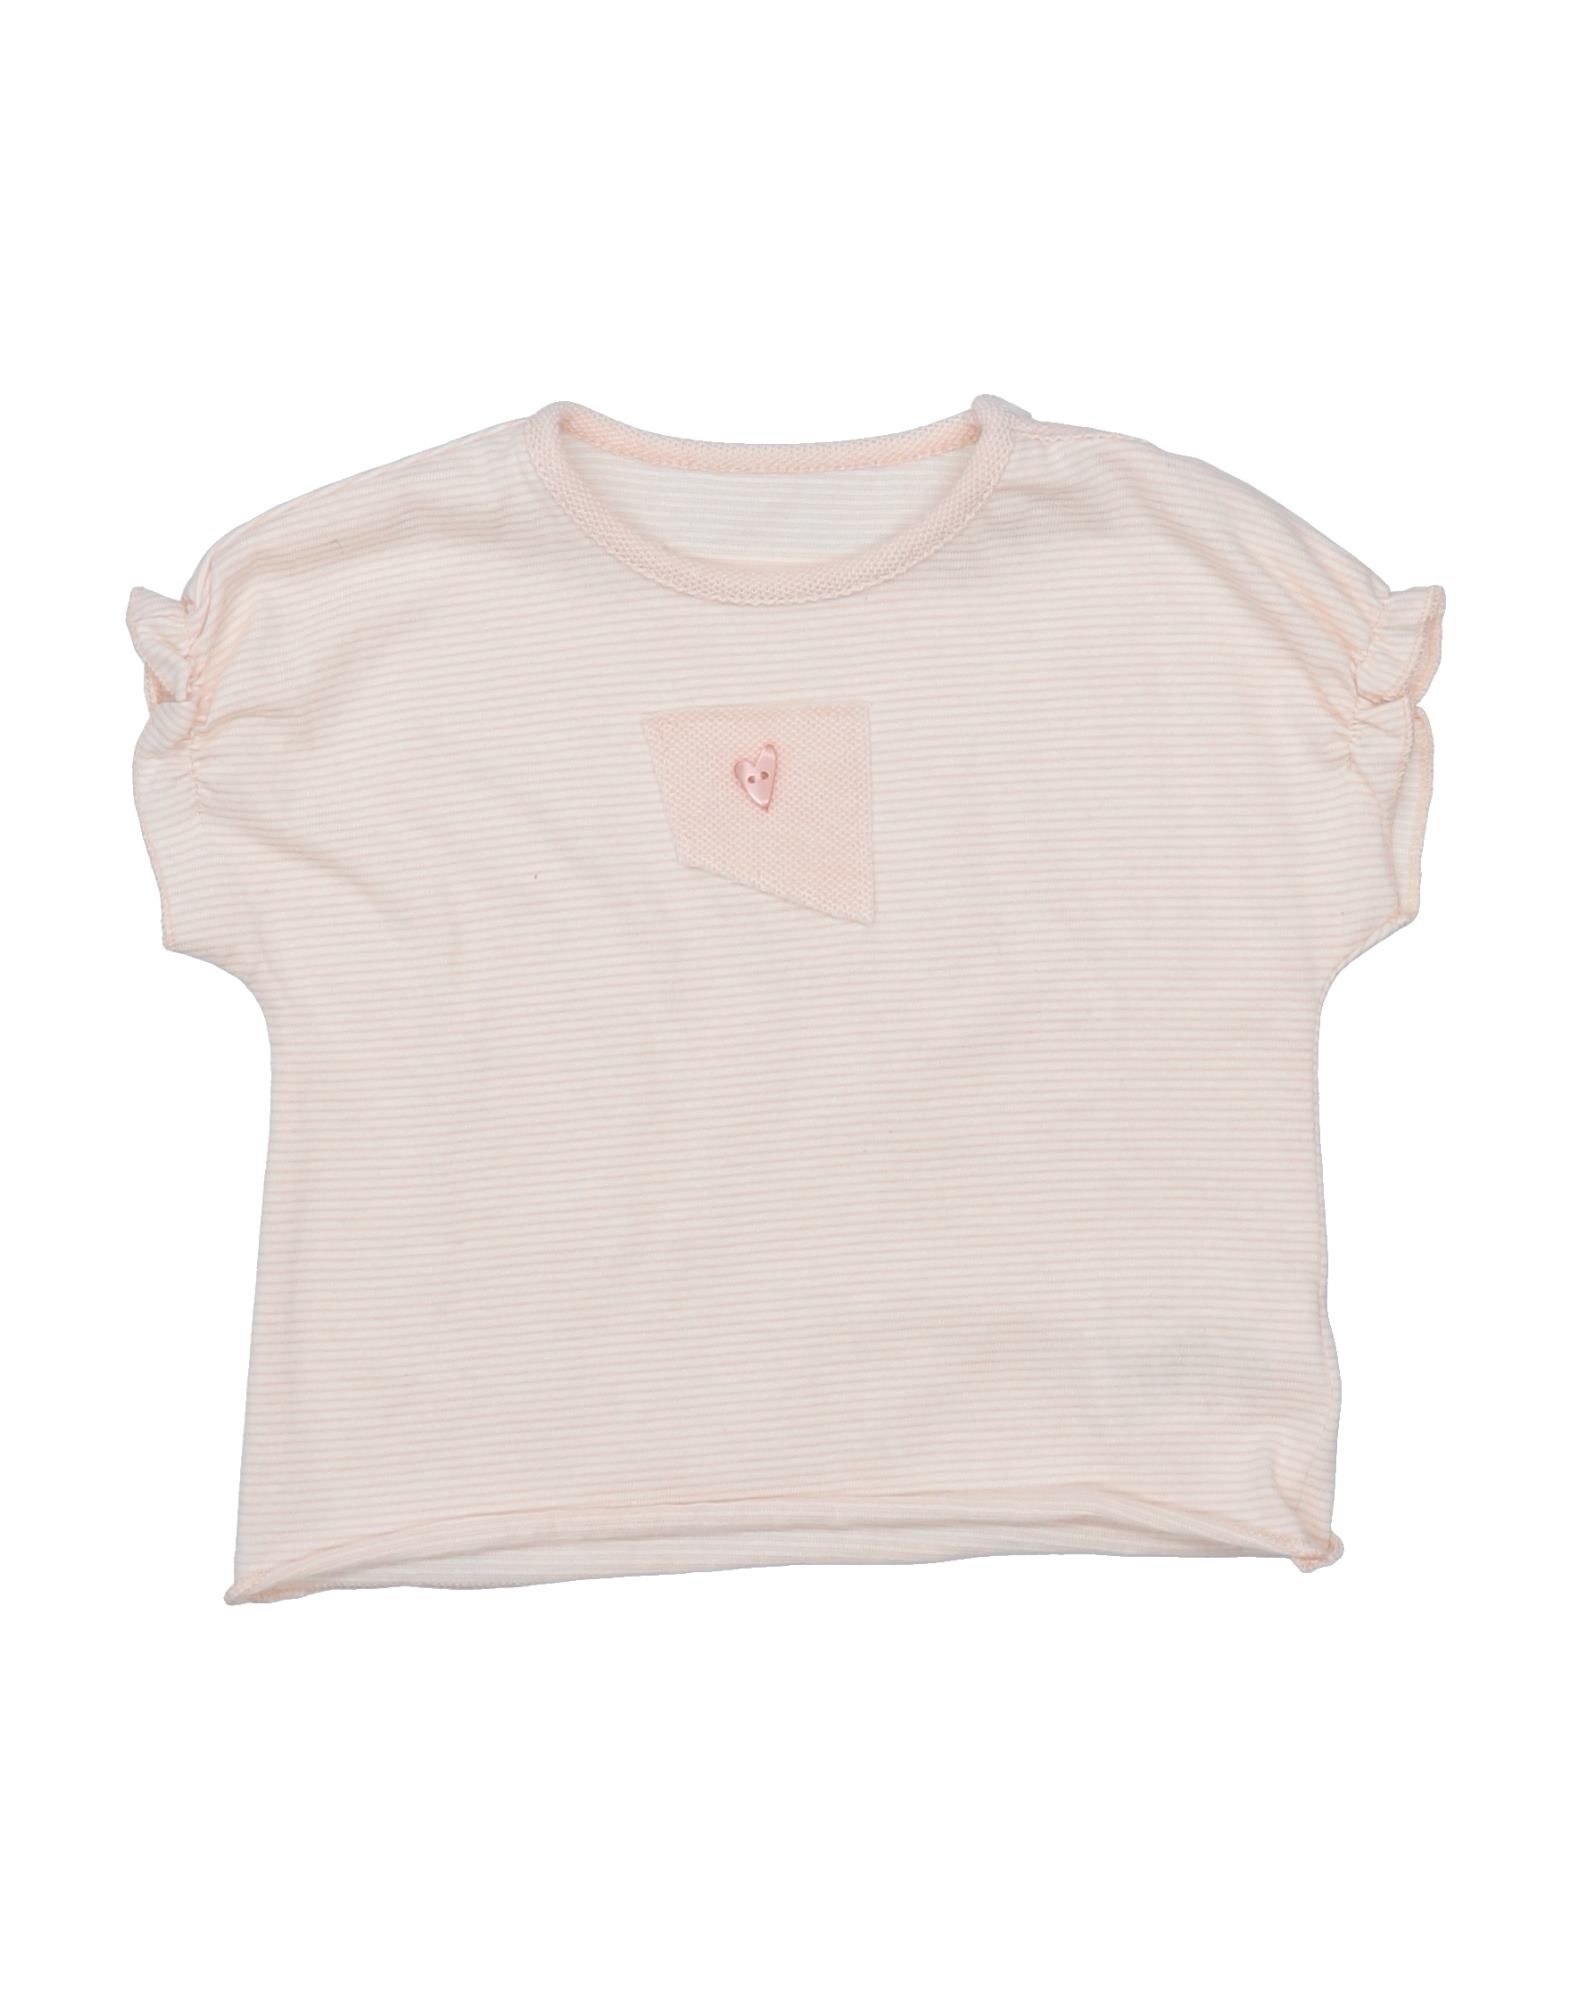 Frugoo Kids' T-shirts In Light Pink